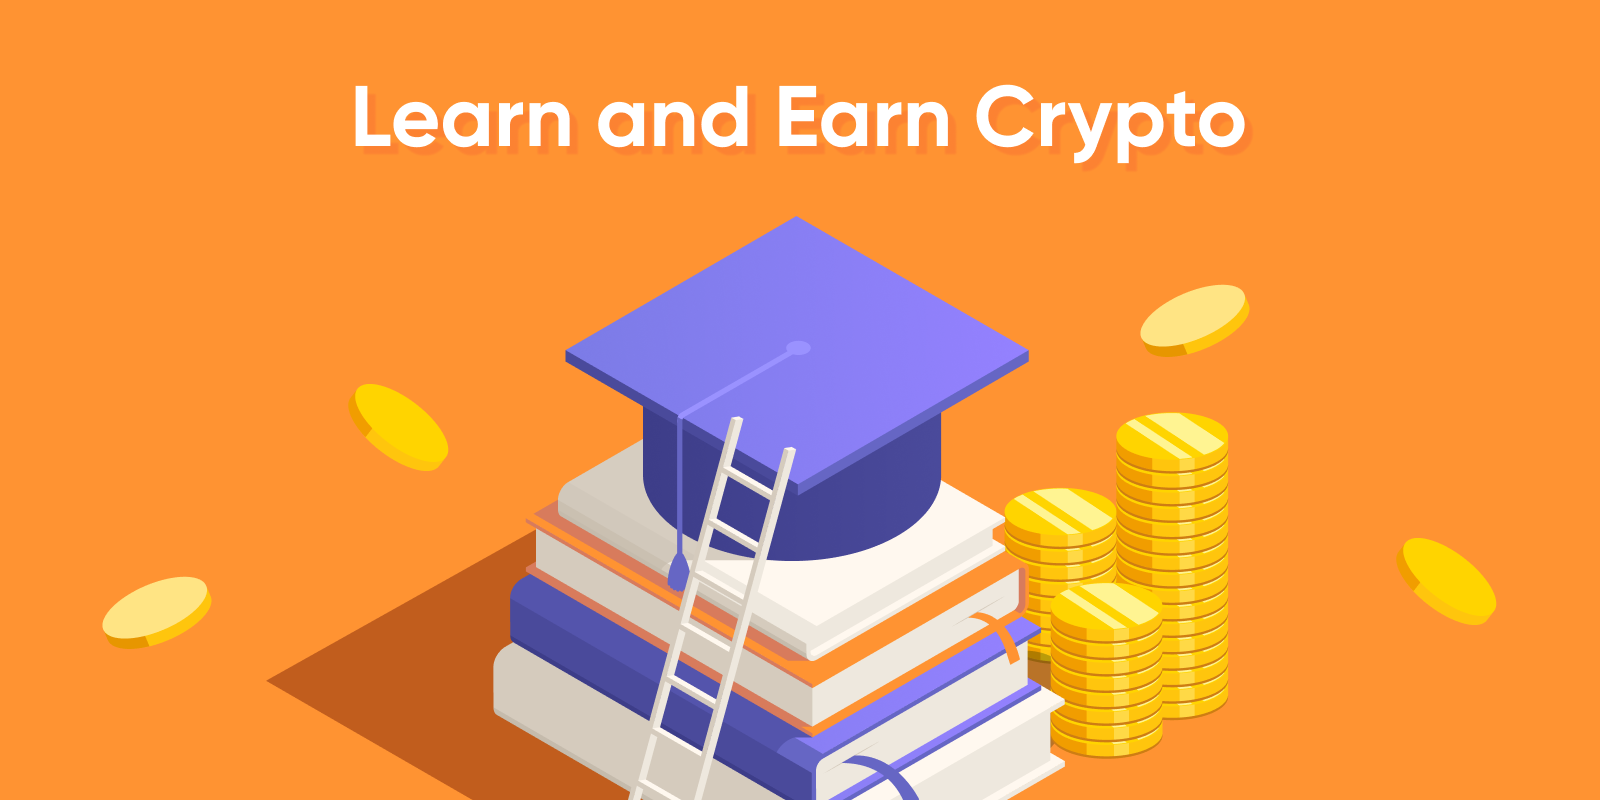 5 Best Learn and Earn Crypto Programs for 2023